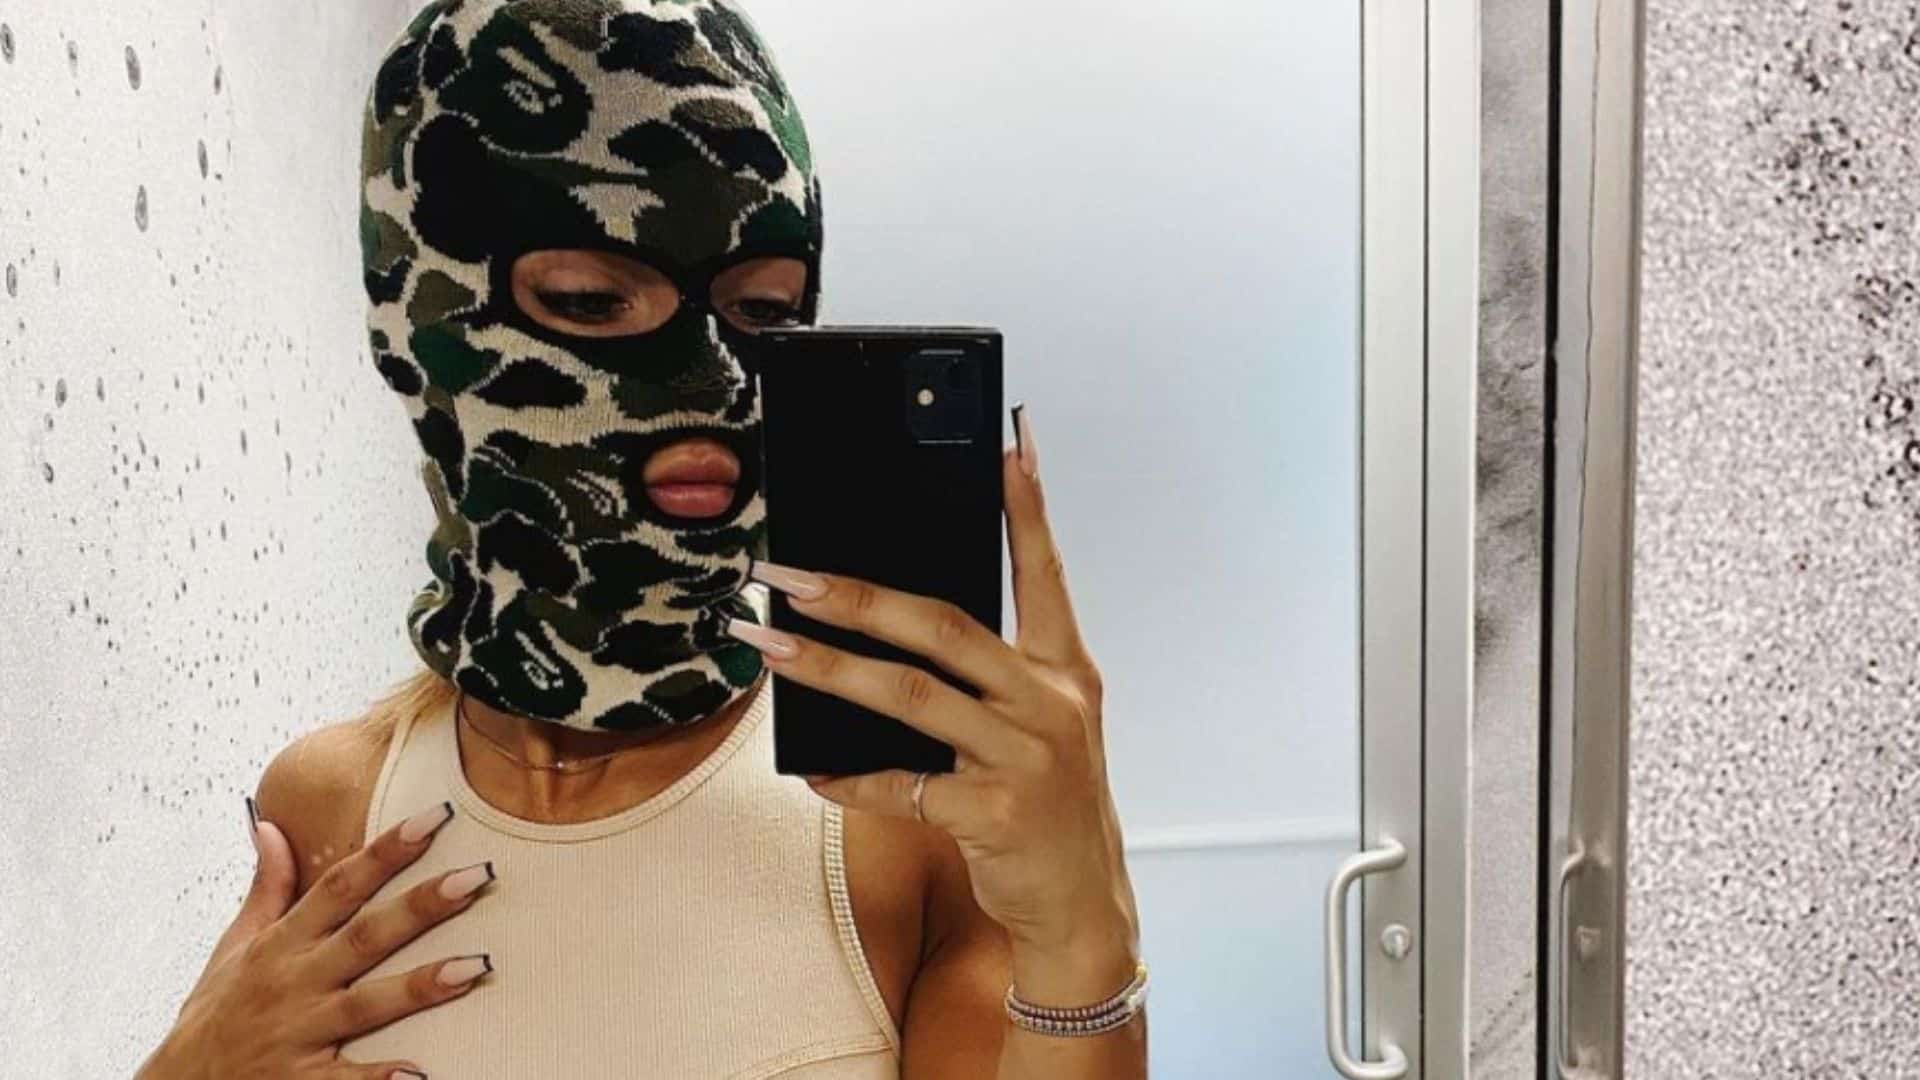 The TikTok star known as TheSkiMaskGirl has revealed her face - Tubefilter